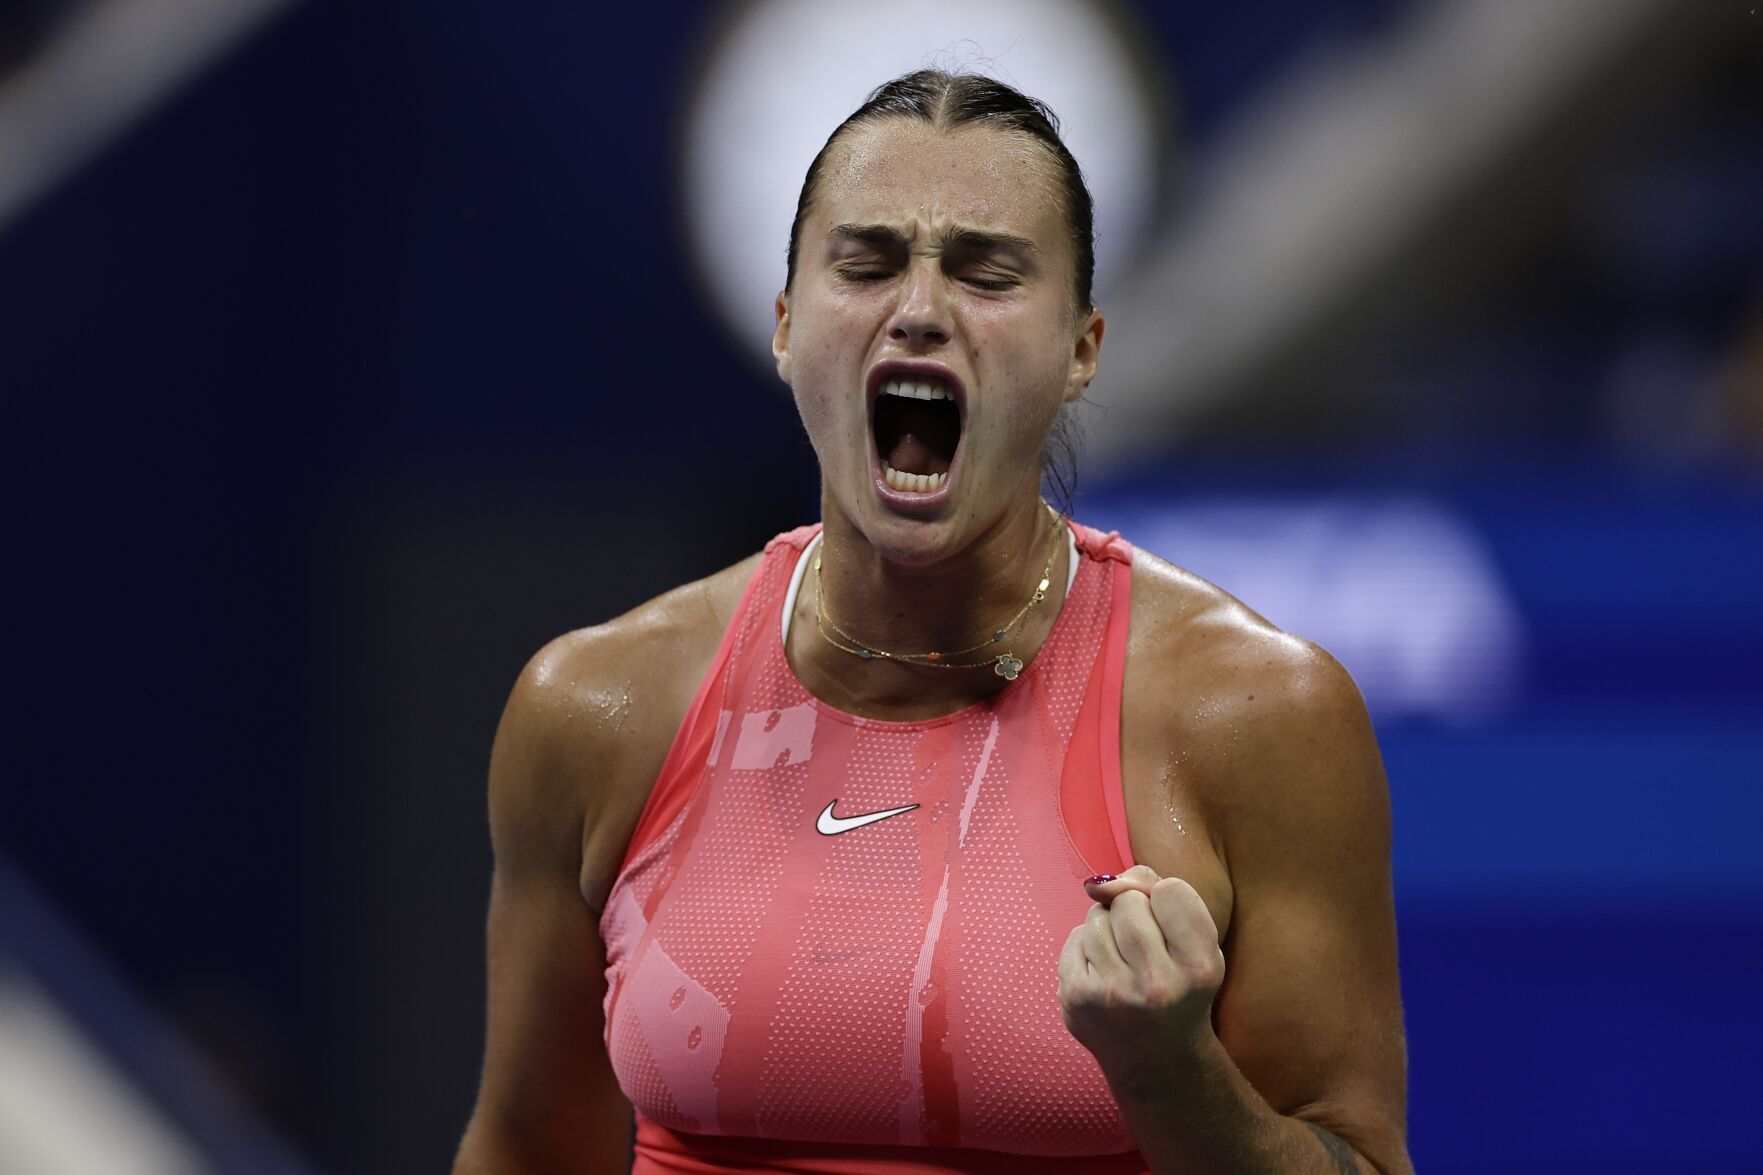 Sabalenka is about to be No